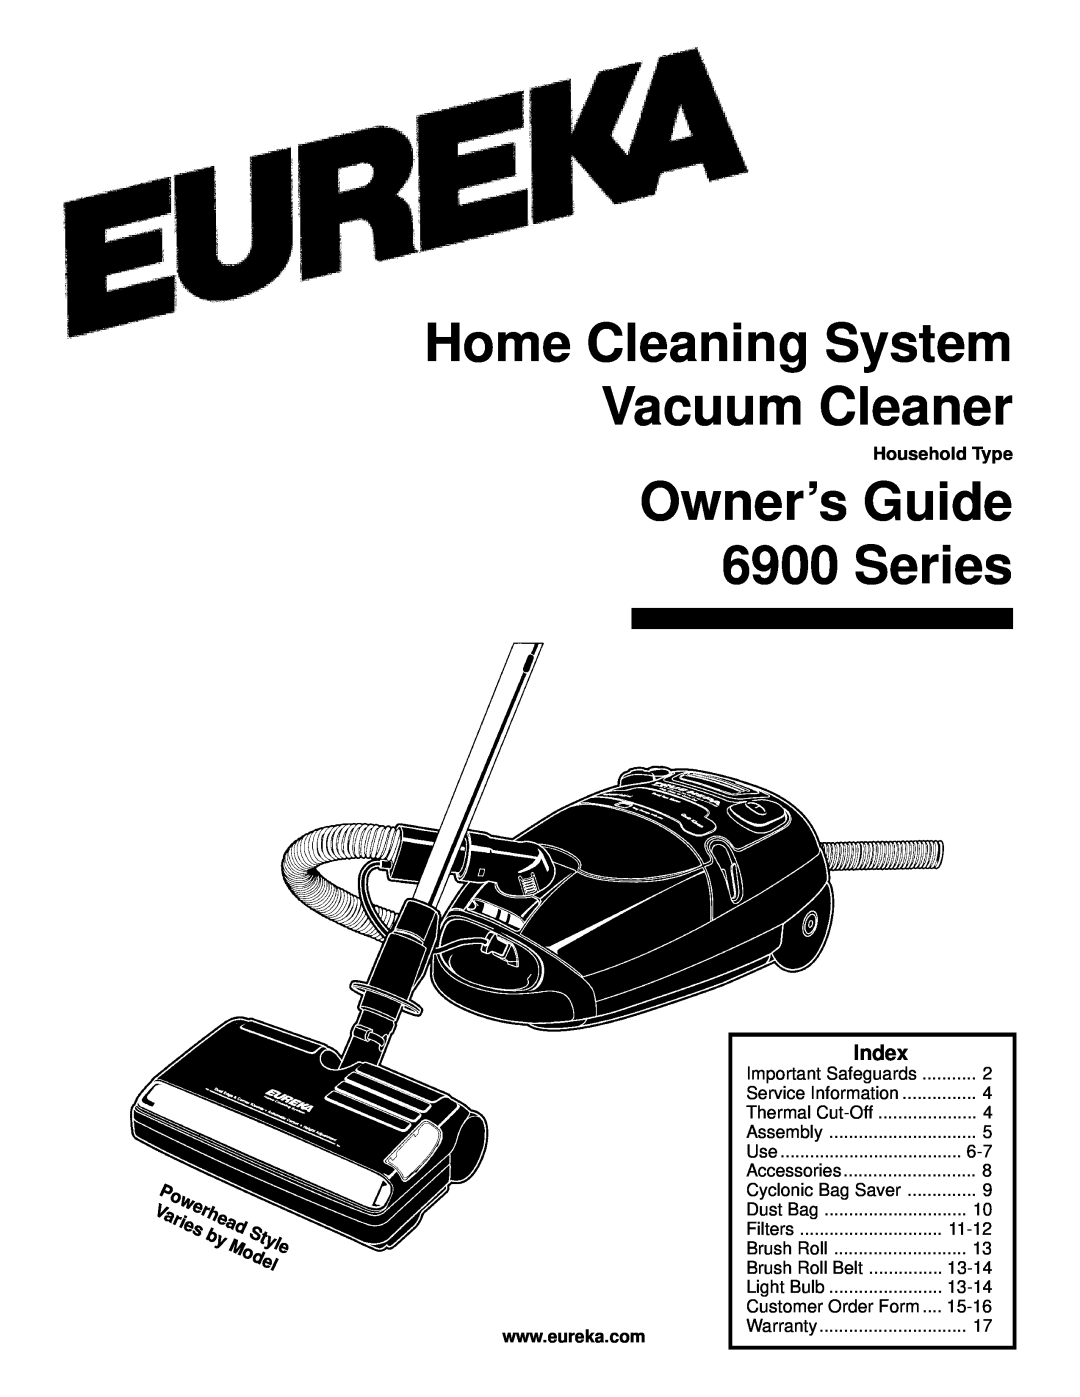 Eureka warranty Index, Household Type, Home Cleaning System Vacuum Cleaner, Owner’s Guide 6900 Series, Assembly & Use 